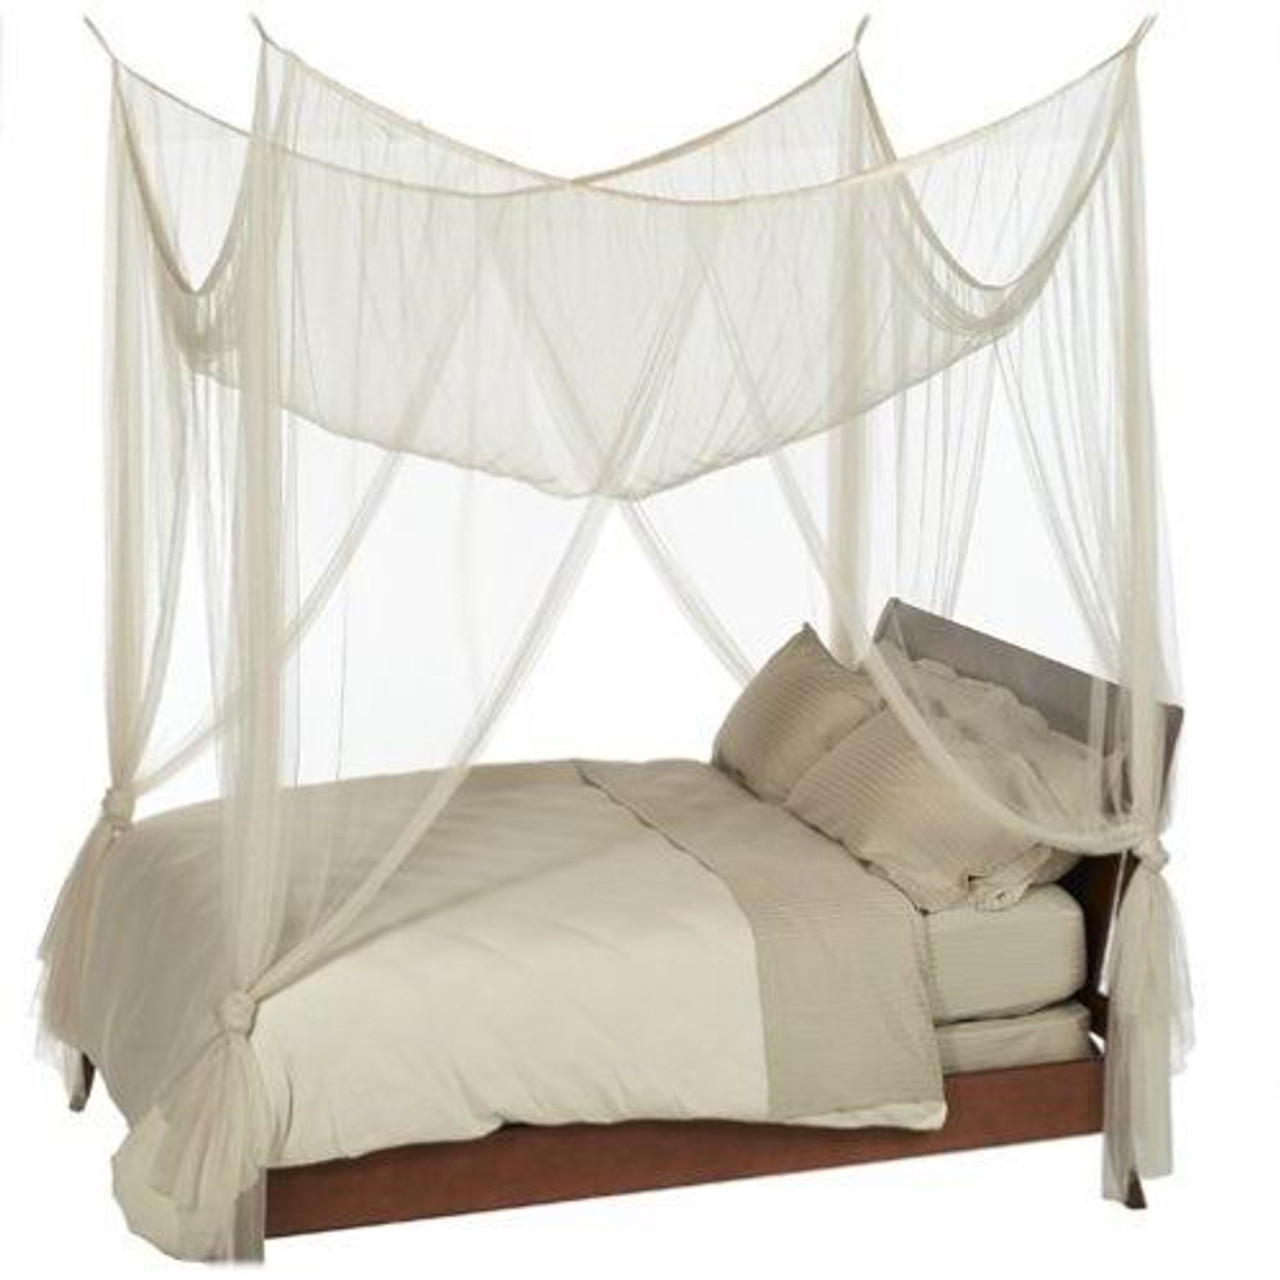 2024 Mosquito Net For Canopy Bed Mosquito Net For Four Poster Bed Design Mosquito  Net For Canopy Beds Mosquito Net Bed Canopy Spotlight